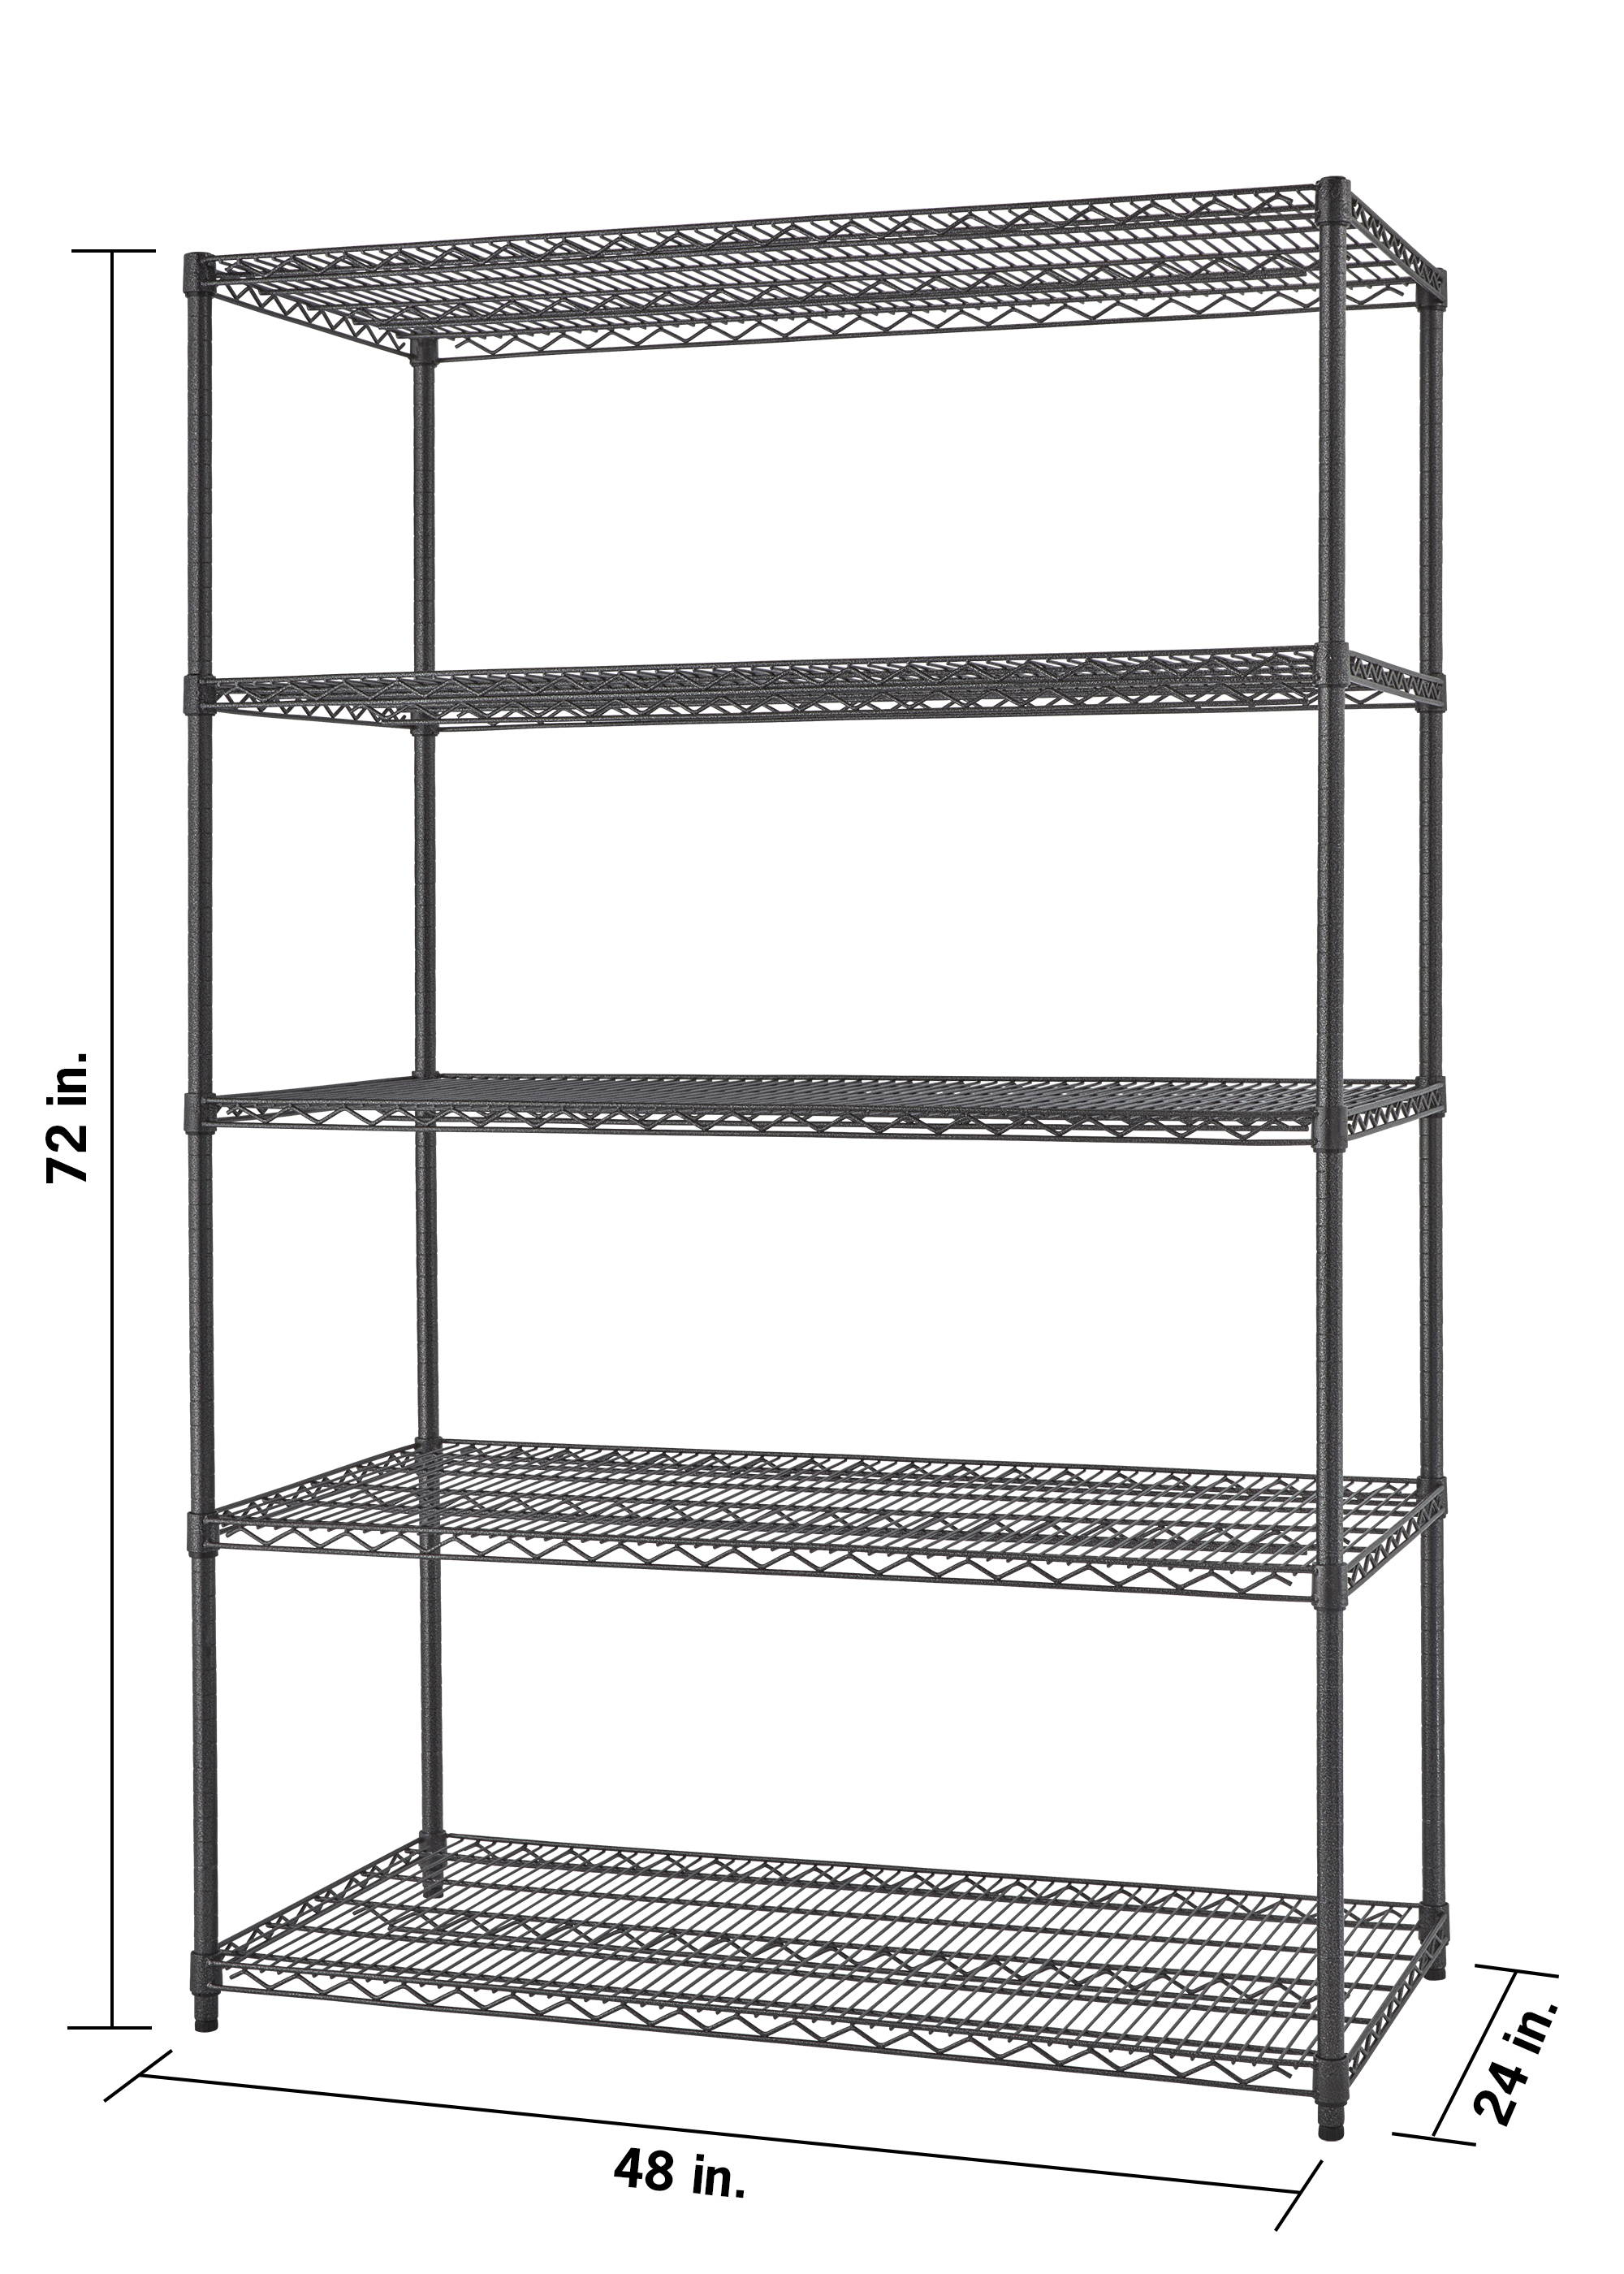 72 inchec high 48 inches wide by 24 inches deep black wire shelving rack with 5 shelves